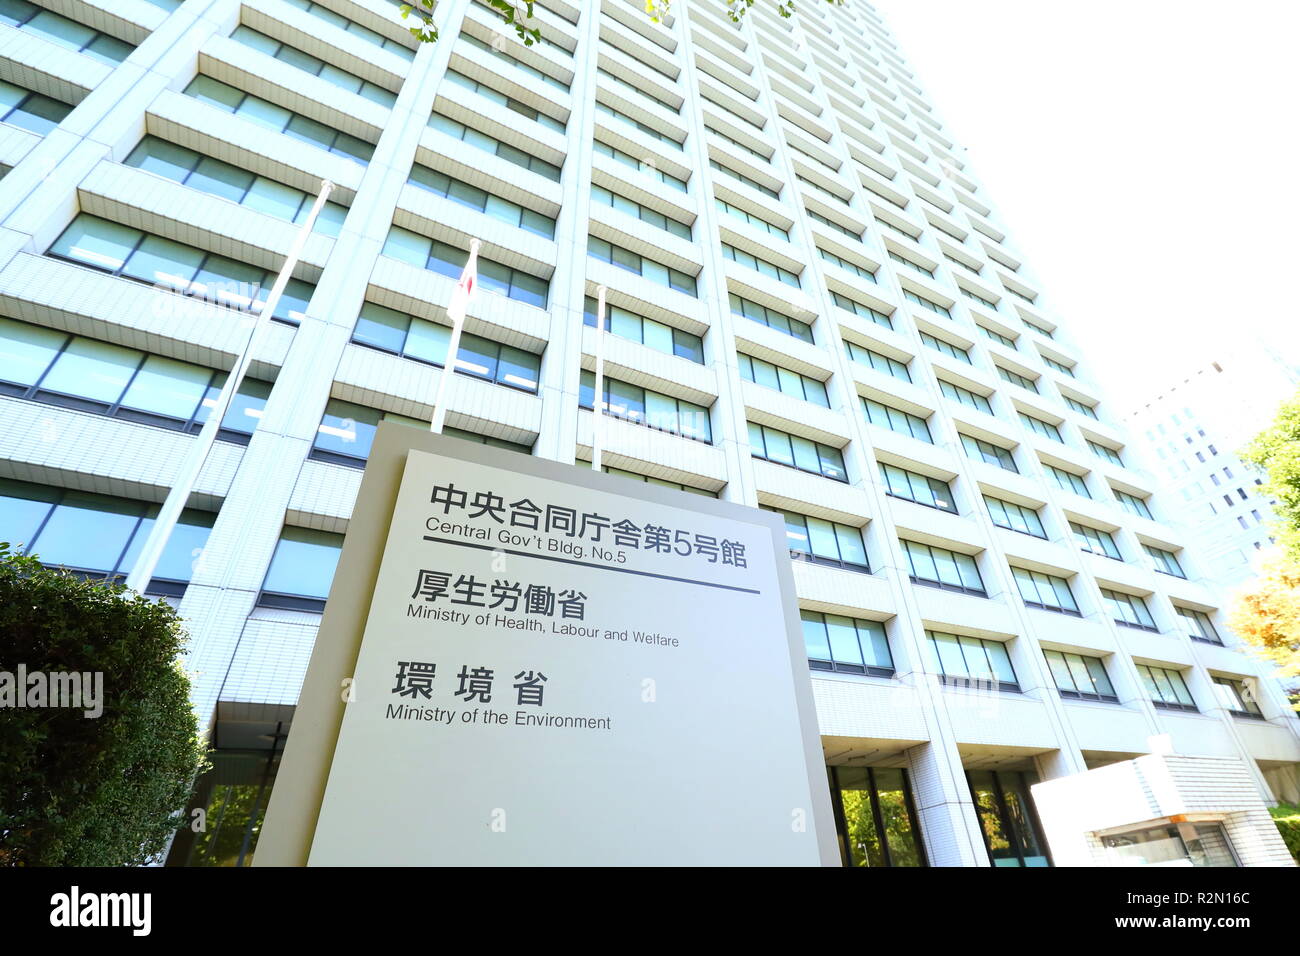 A General View Of The Central Government Building No 5 Main Building Housing The Ministry Of Health Labour And Welfare The Ministry Of The Environment In Tokyo On November 15 2018 Japan Credit